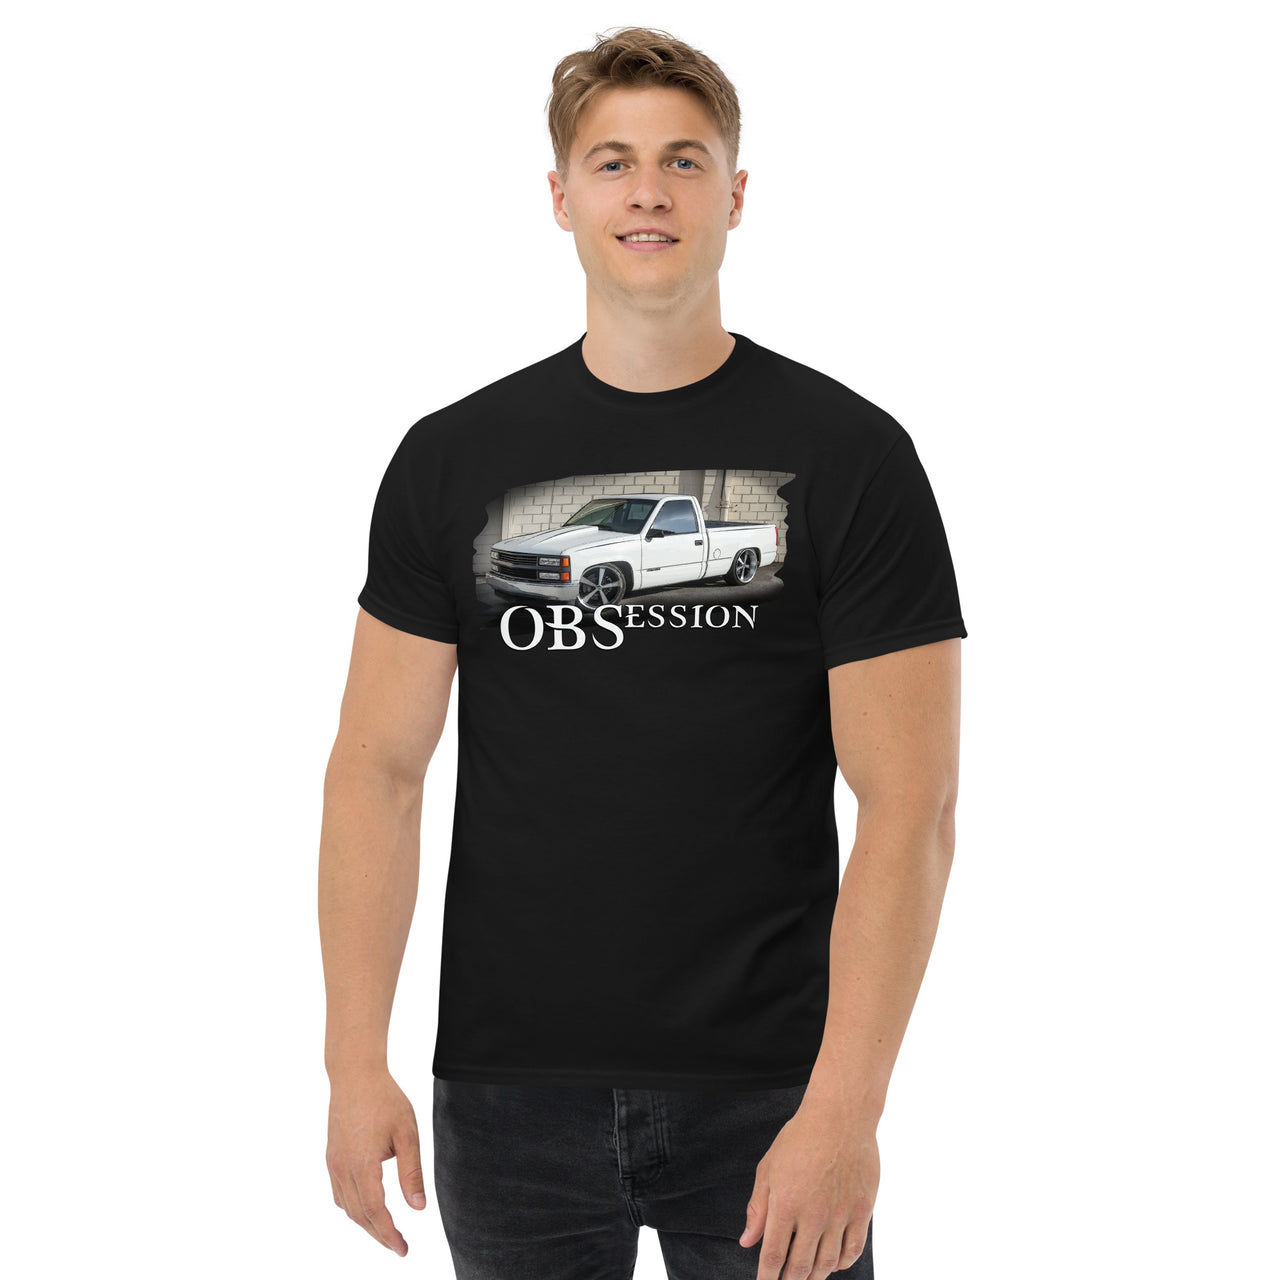 OBS Truck T-Shirt Lowered C1500 modeled in black